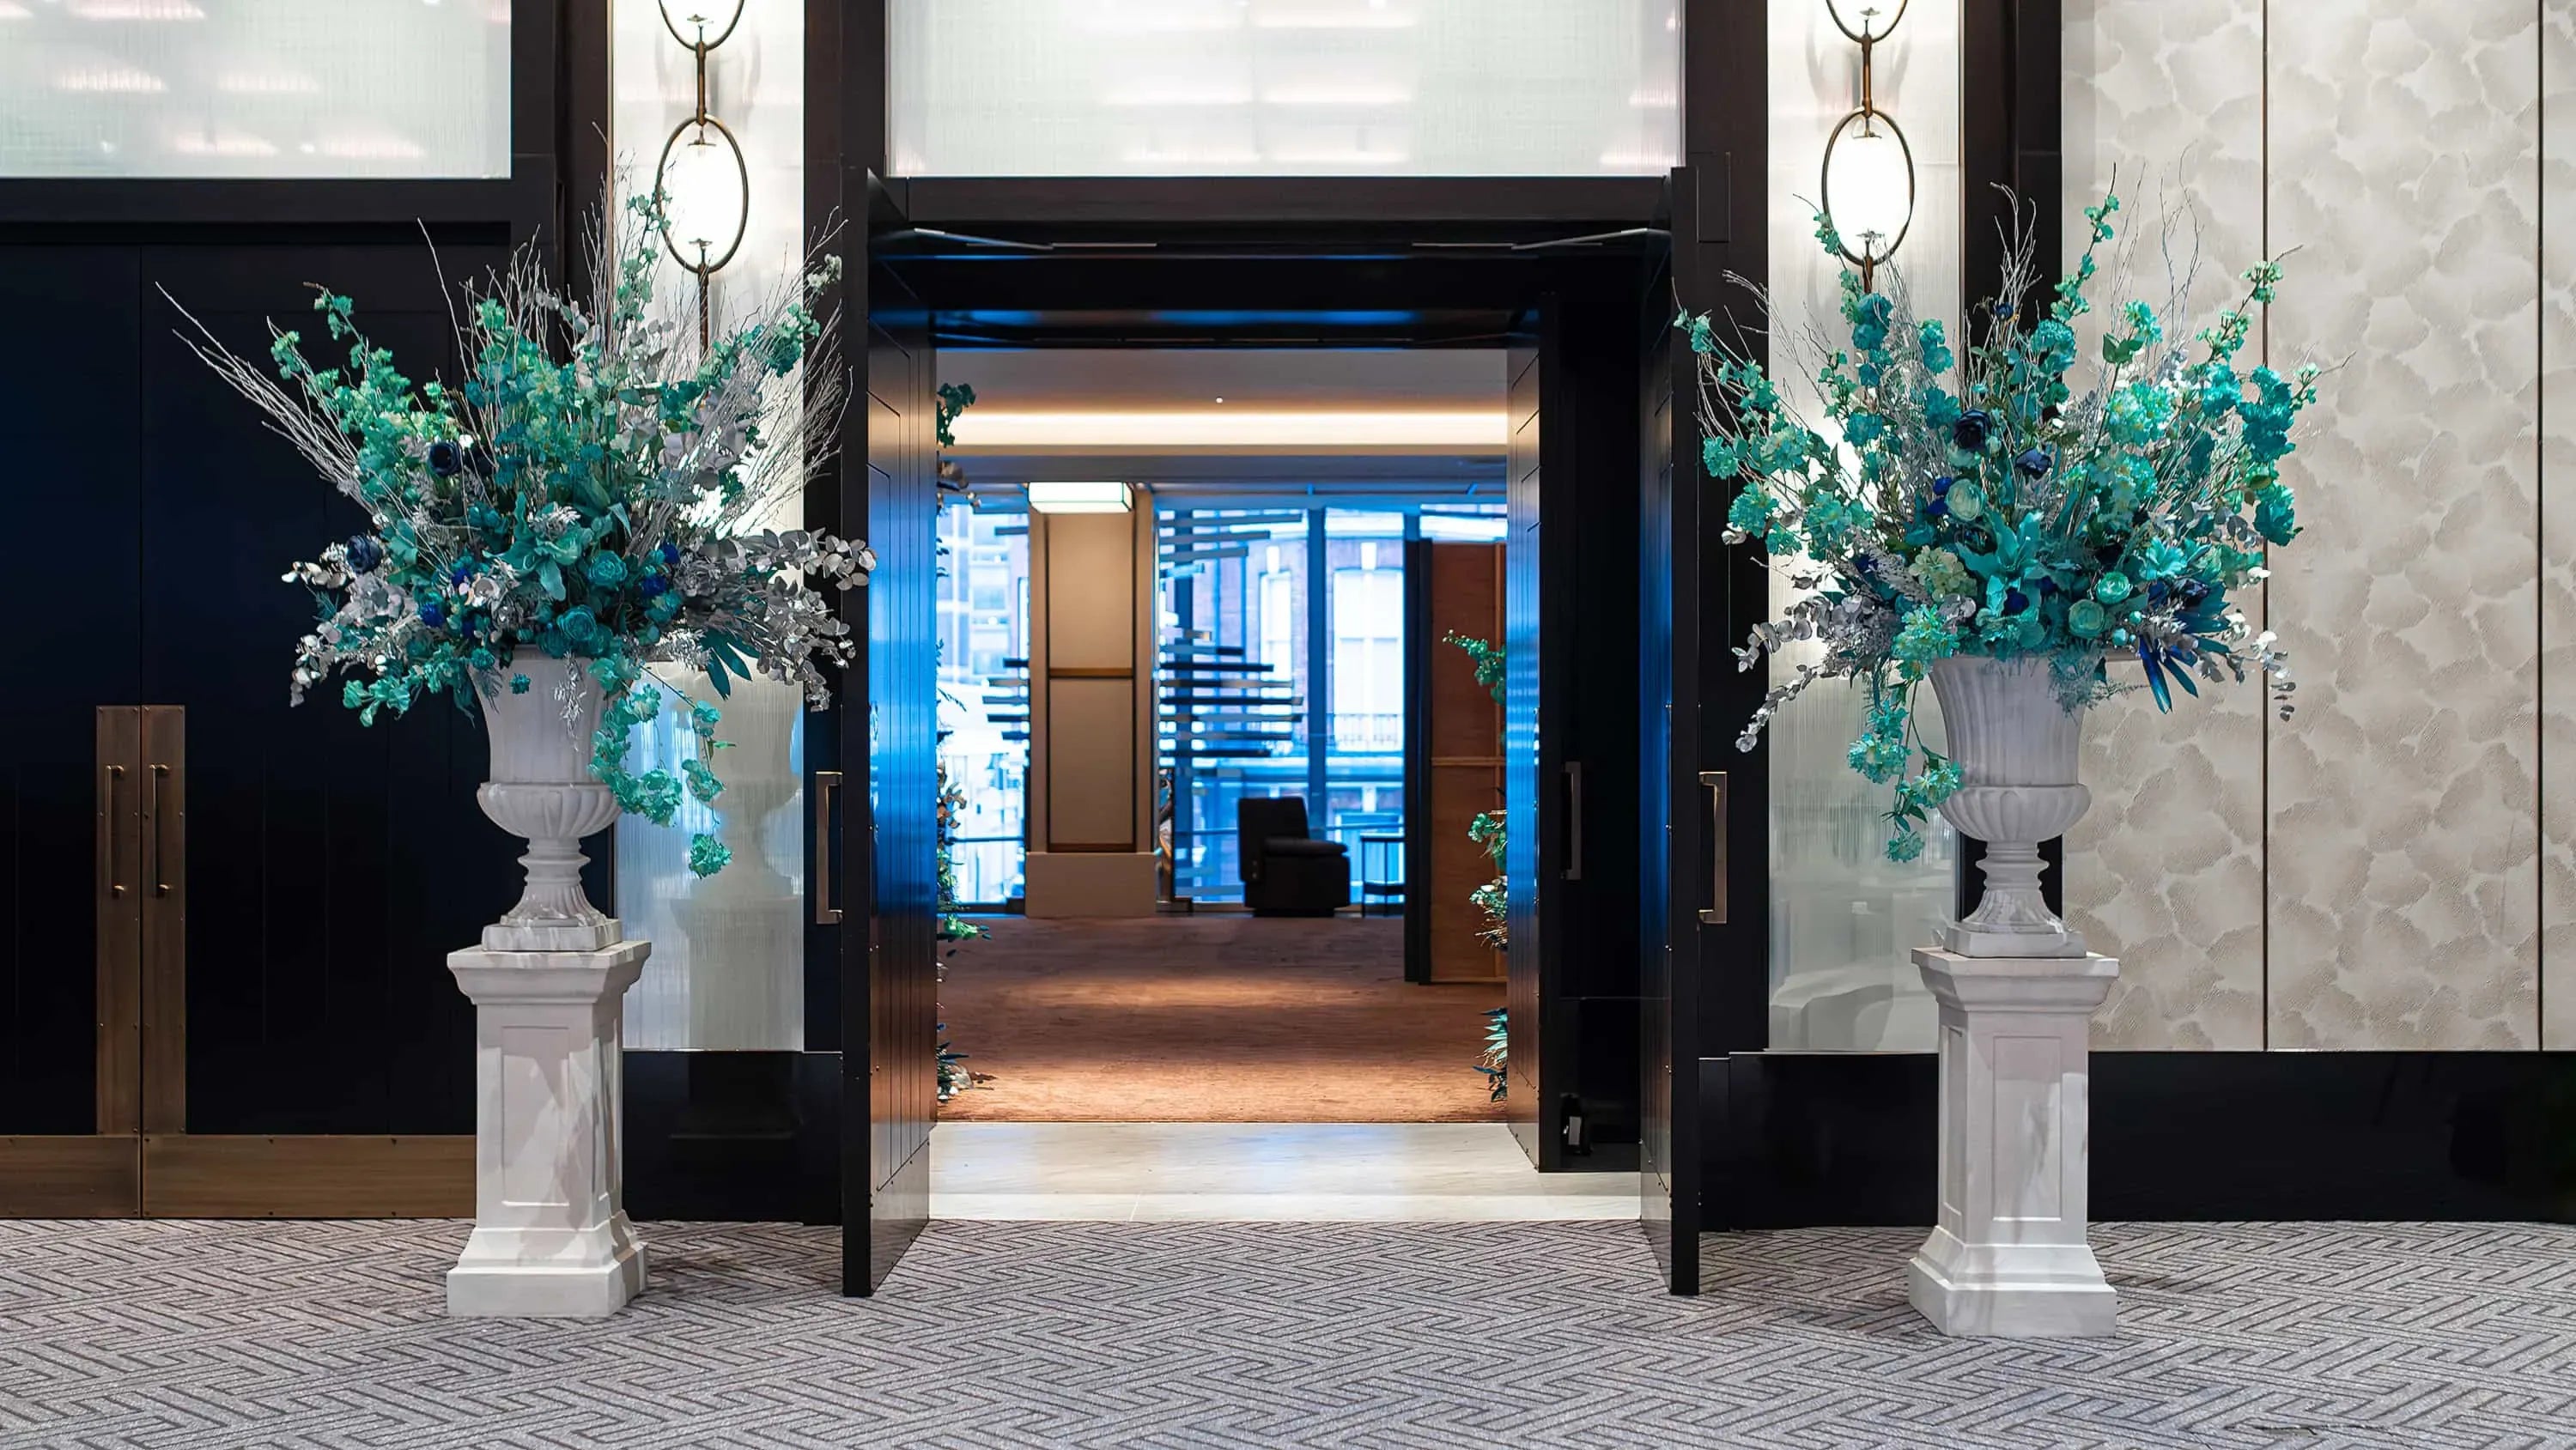 Classic entryway decor featuring matching ornate bouquets with blue and silver accents on white classical columns, creating a luxurious welcome to the sophisticated hallway beyond ad INMODE